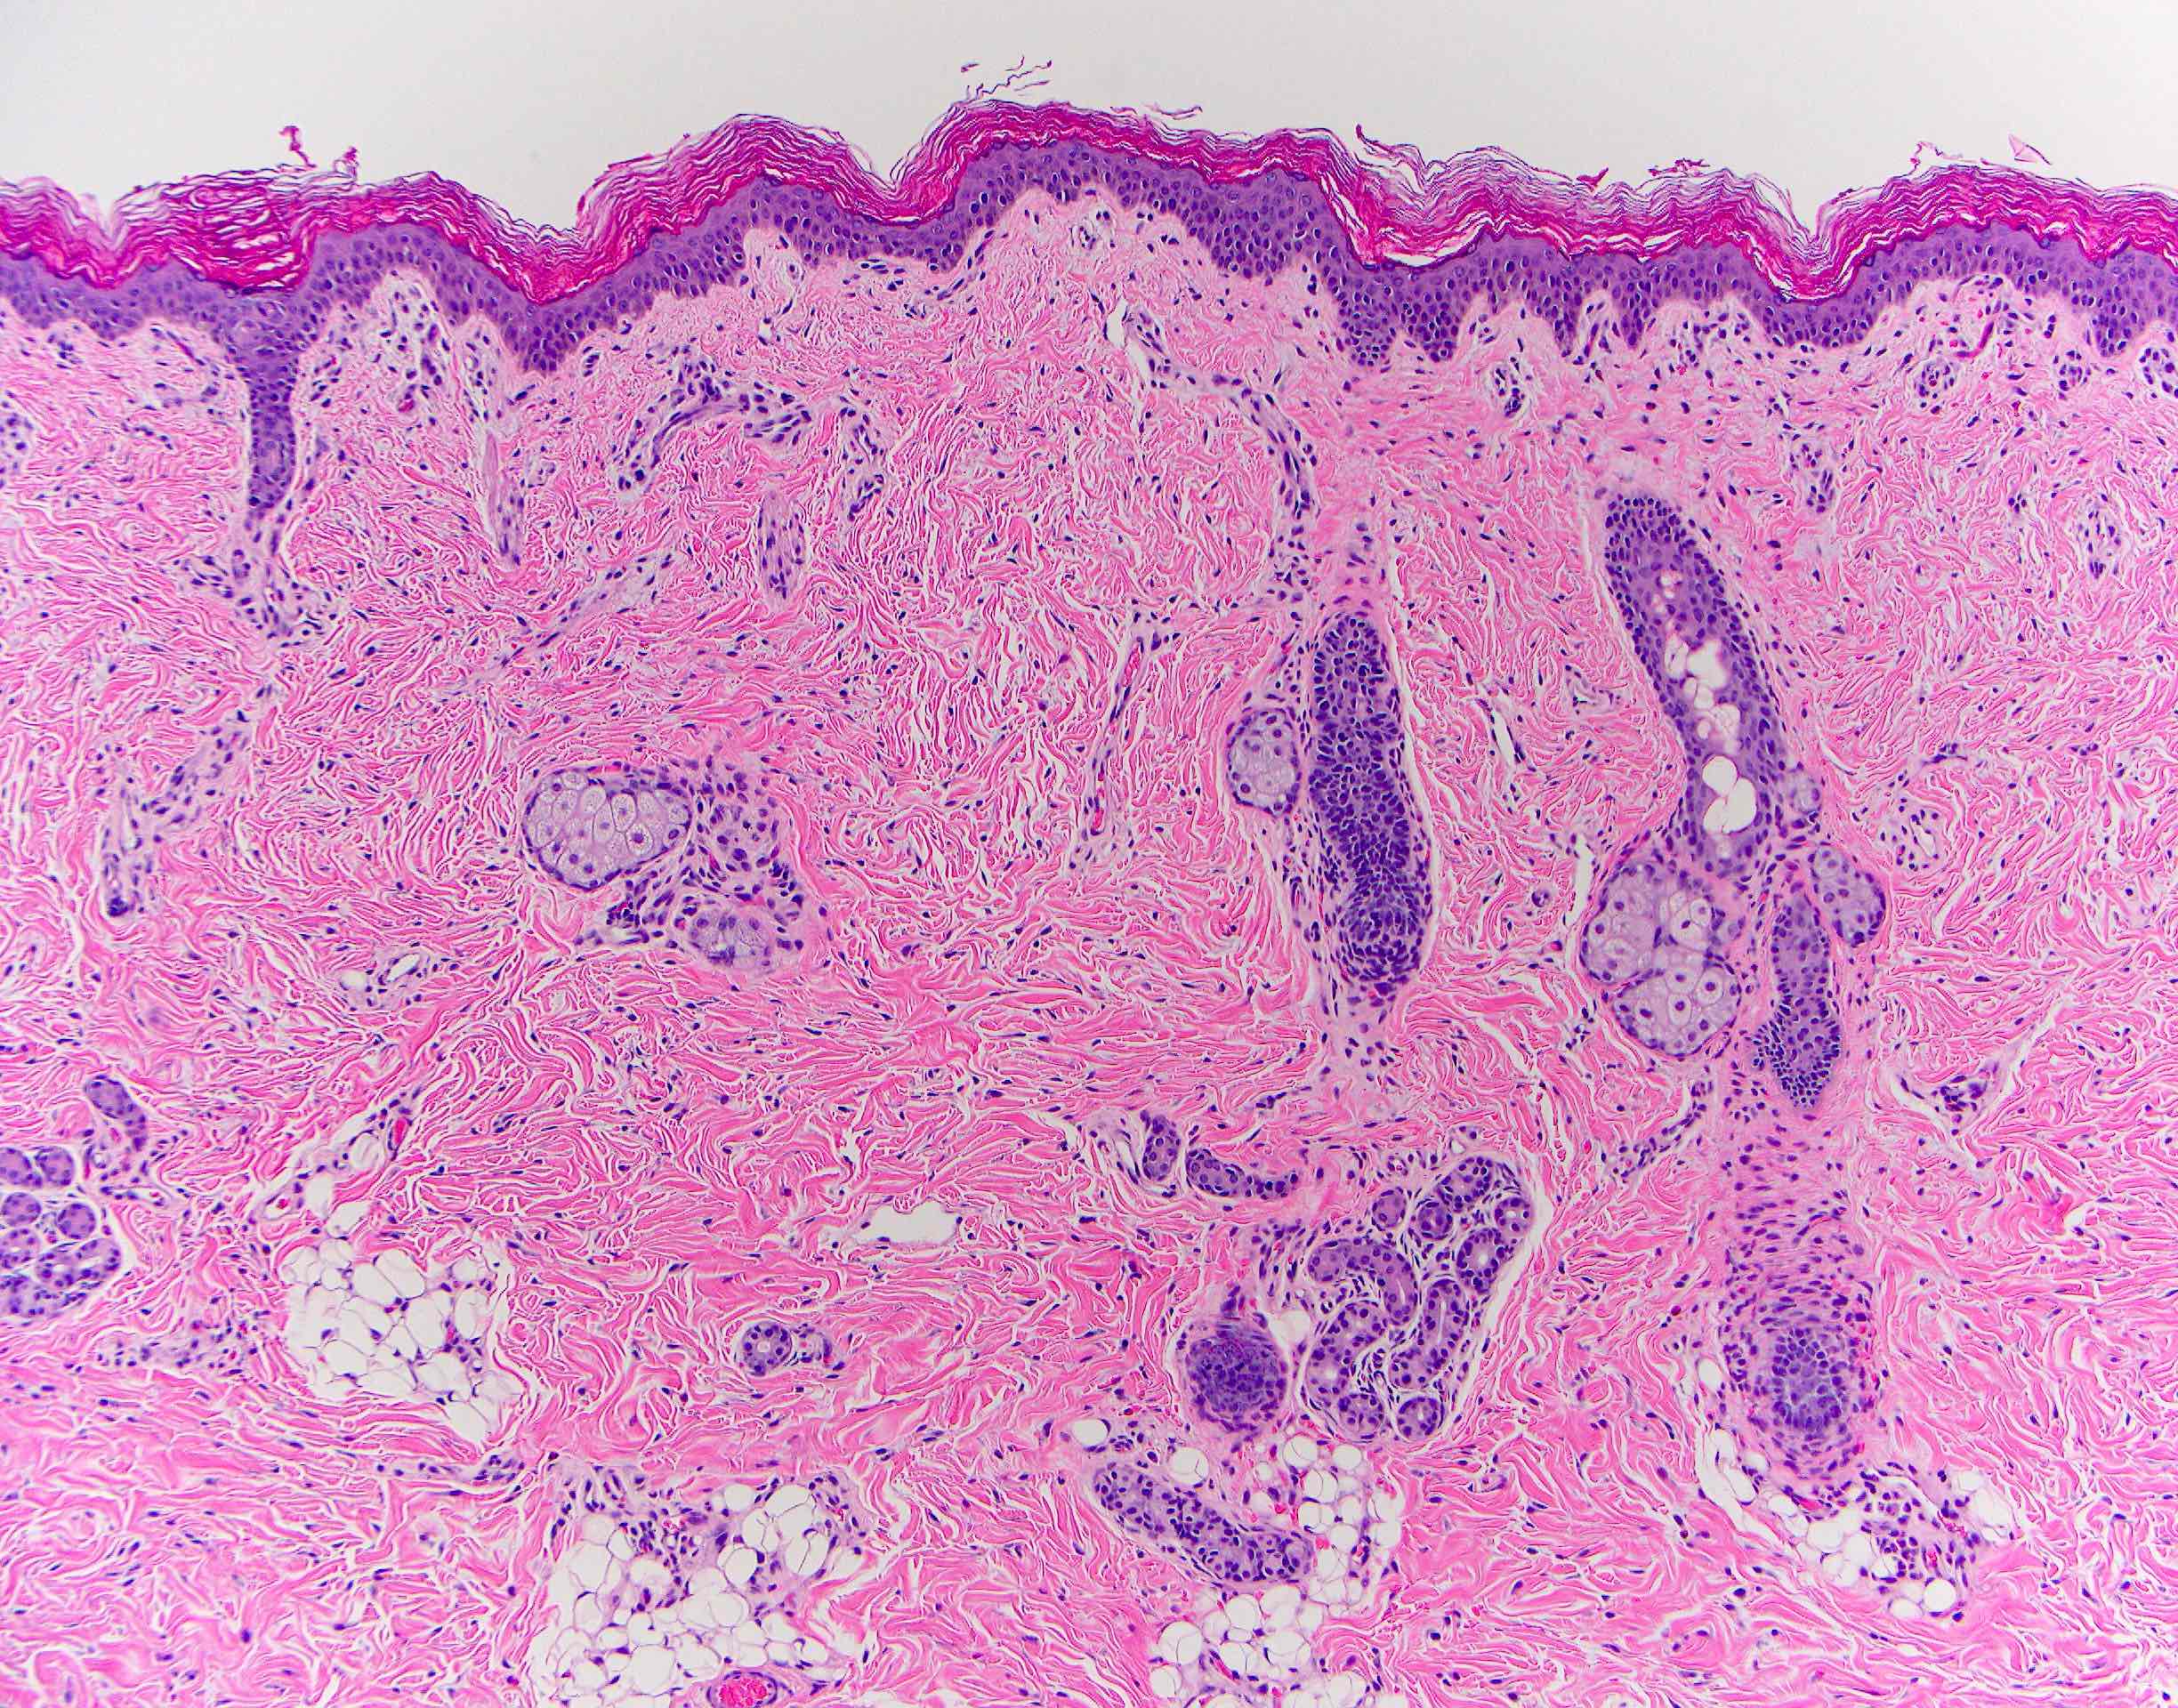 Stratified squamous epithelial lining